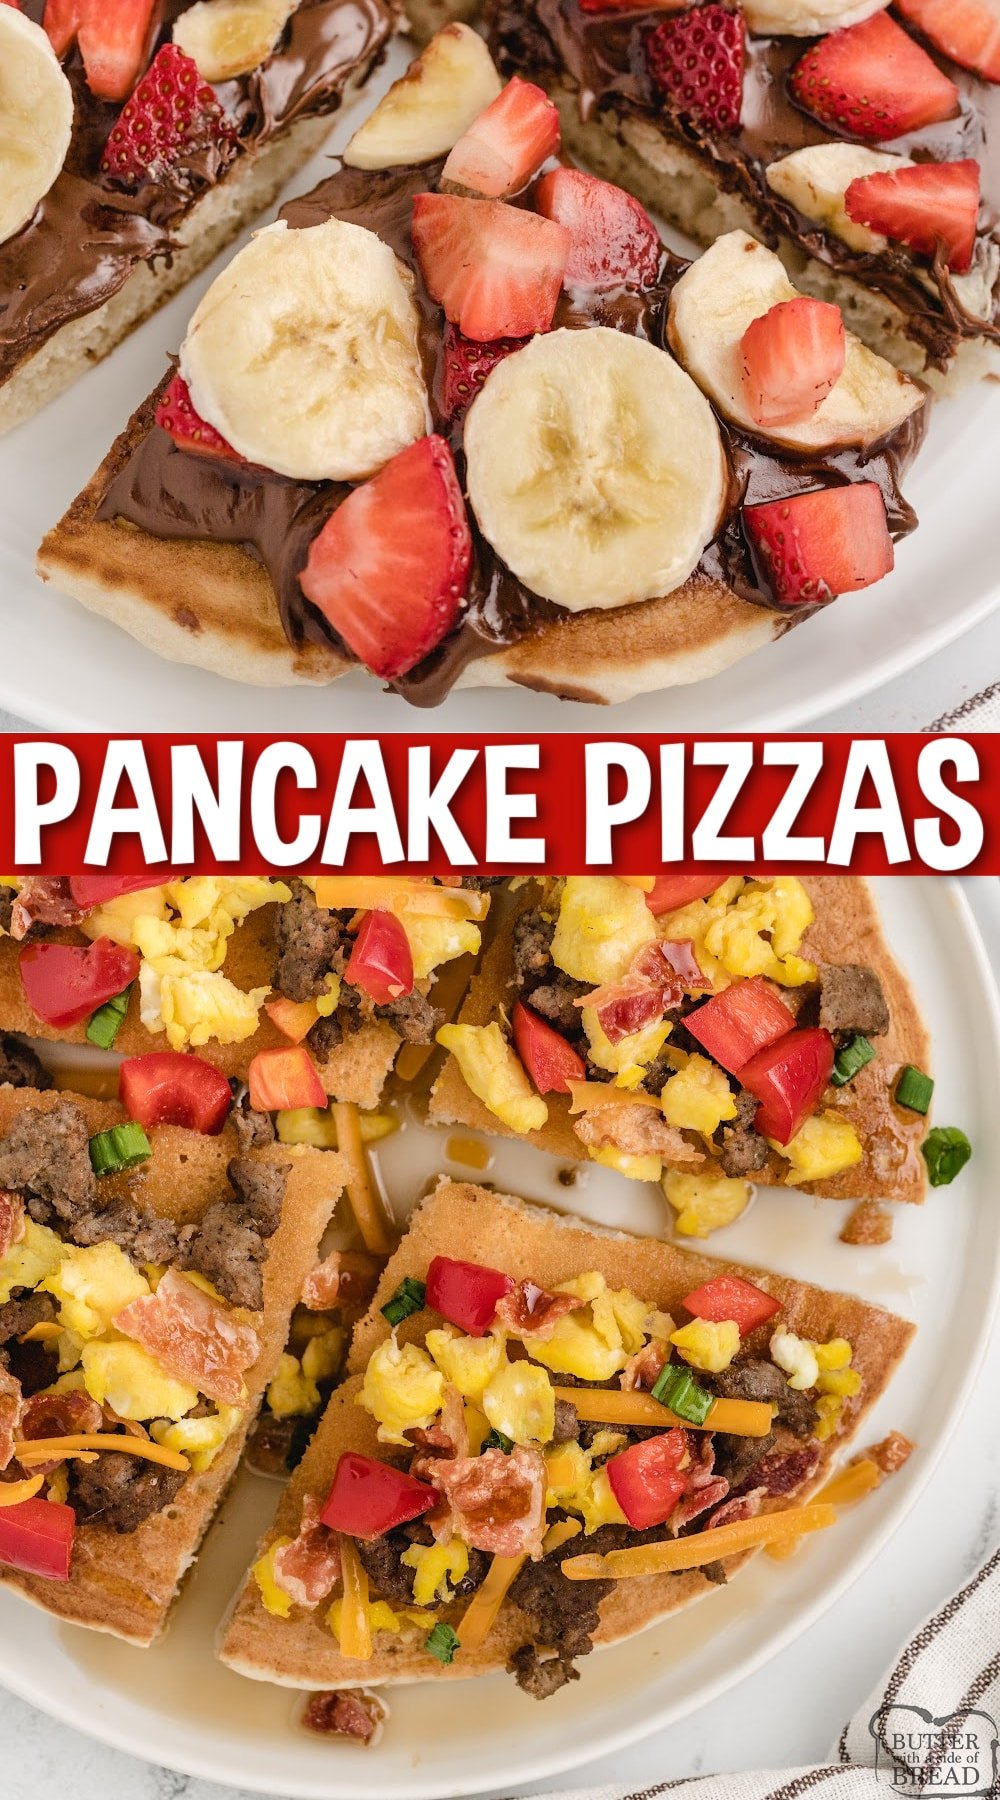 Serve these breakfast pancake pizzas with sweet or savory toppings, and they're sure to be loved either way. Everyone is sure to love this unique and fun twist on a breakfast classic.